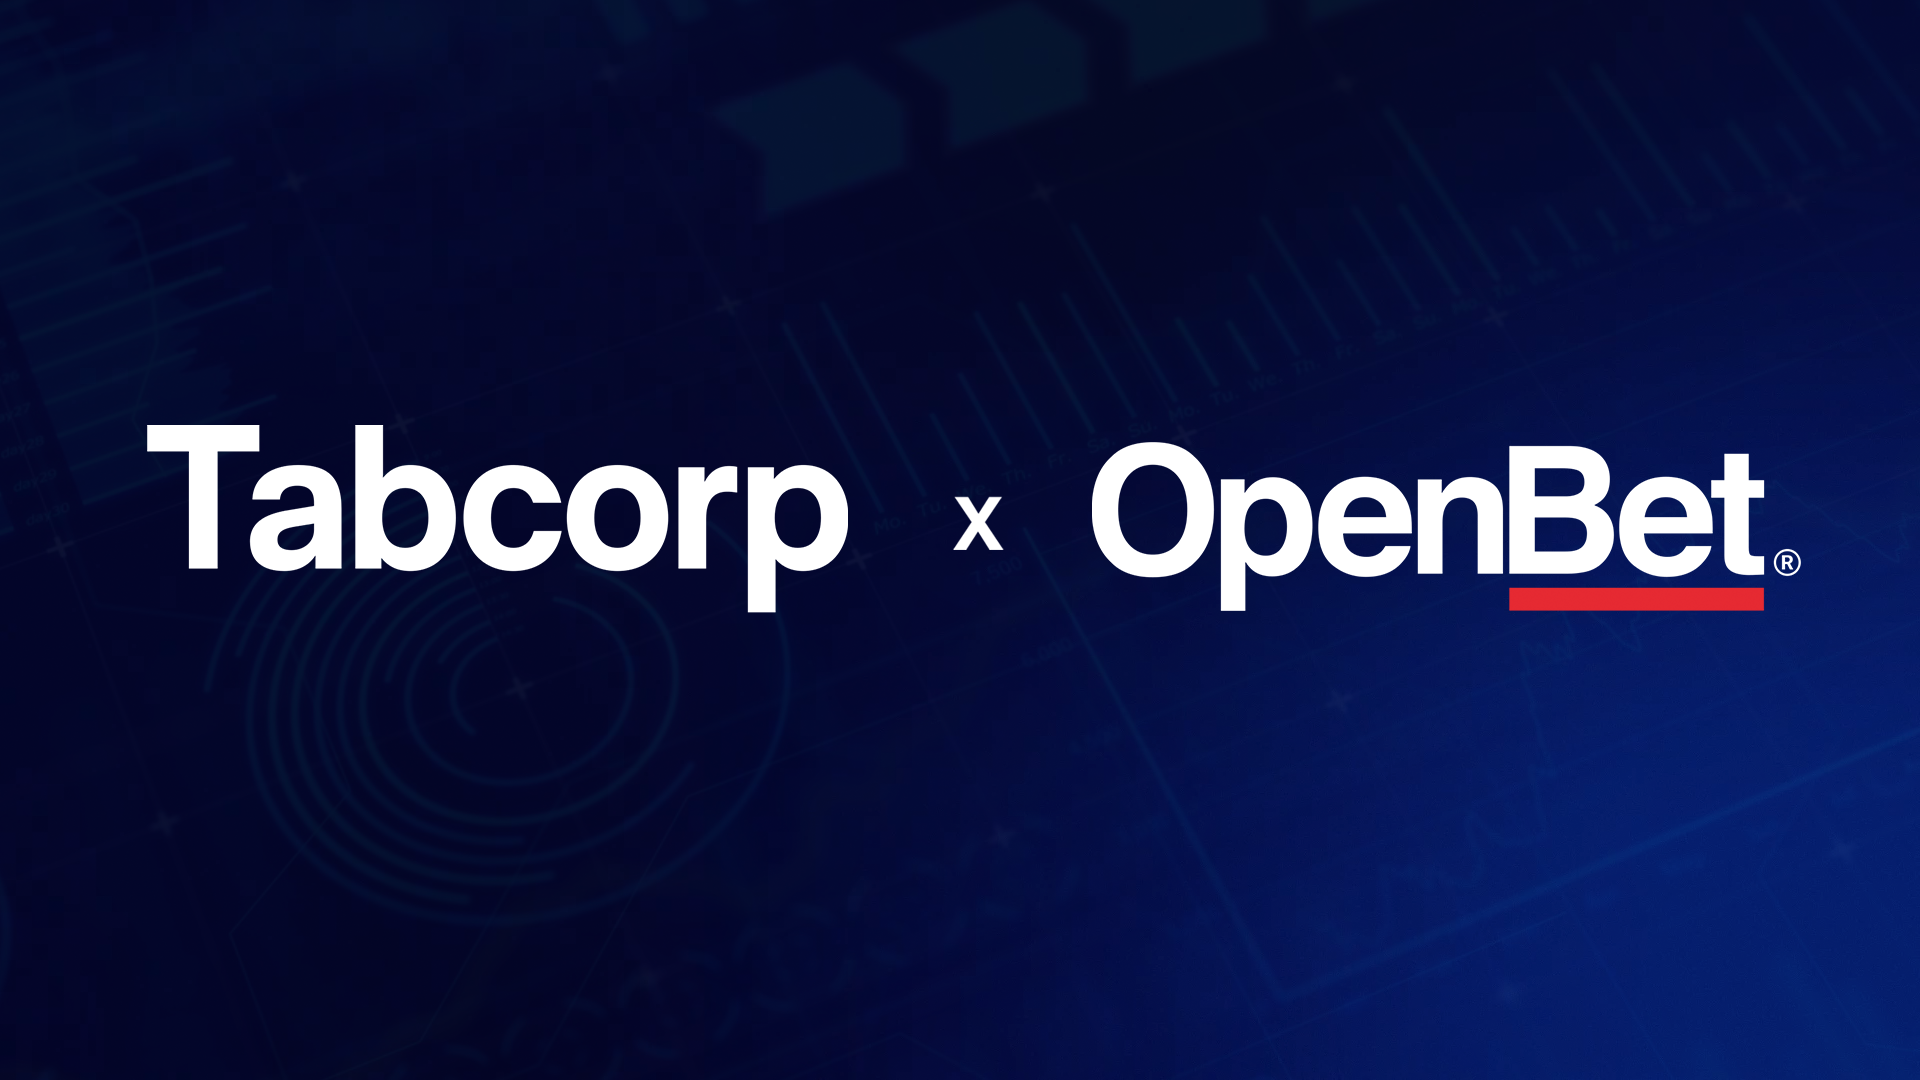 Tabcorp partners with OpenBet’s sportsbook technology to propel growth and enhance user experience